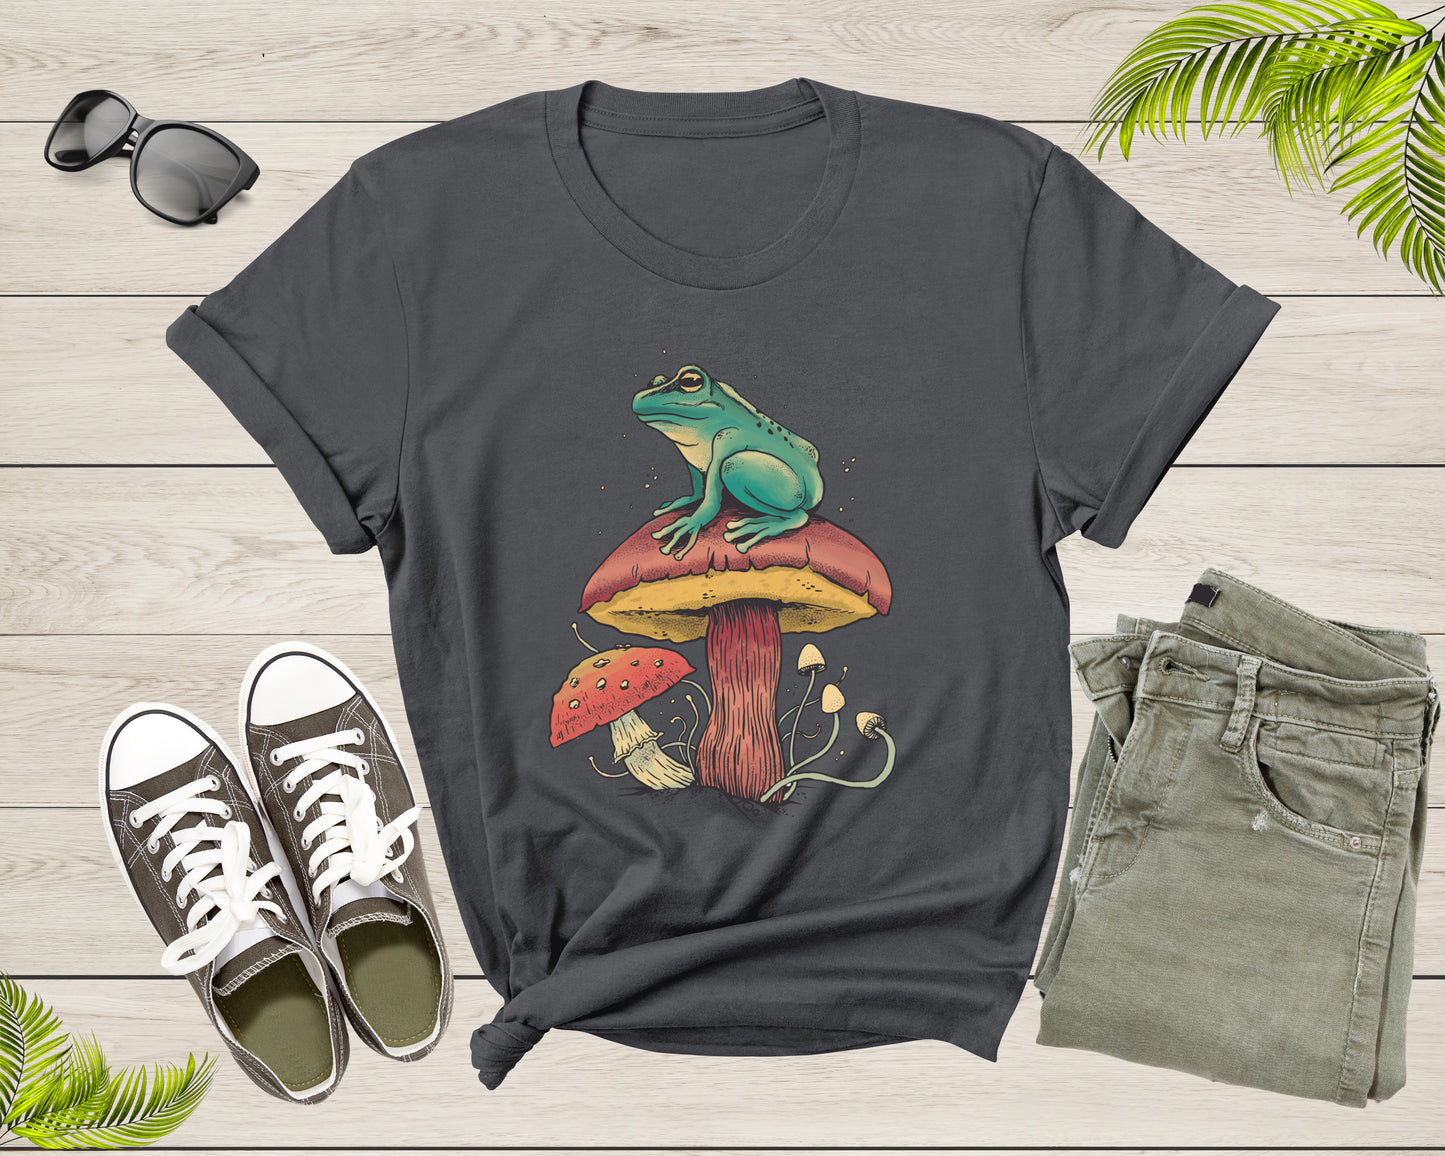 Cool Green Frog Toad Animal Sitting on Mushrooms Thinking T-Shirt Frog Lover Shirt Frog And Toad Mushroom Shirt Frog Lover Animal Tshirt